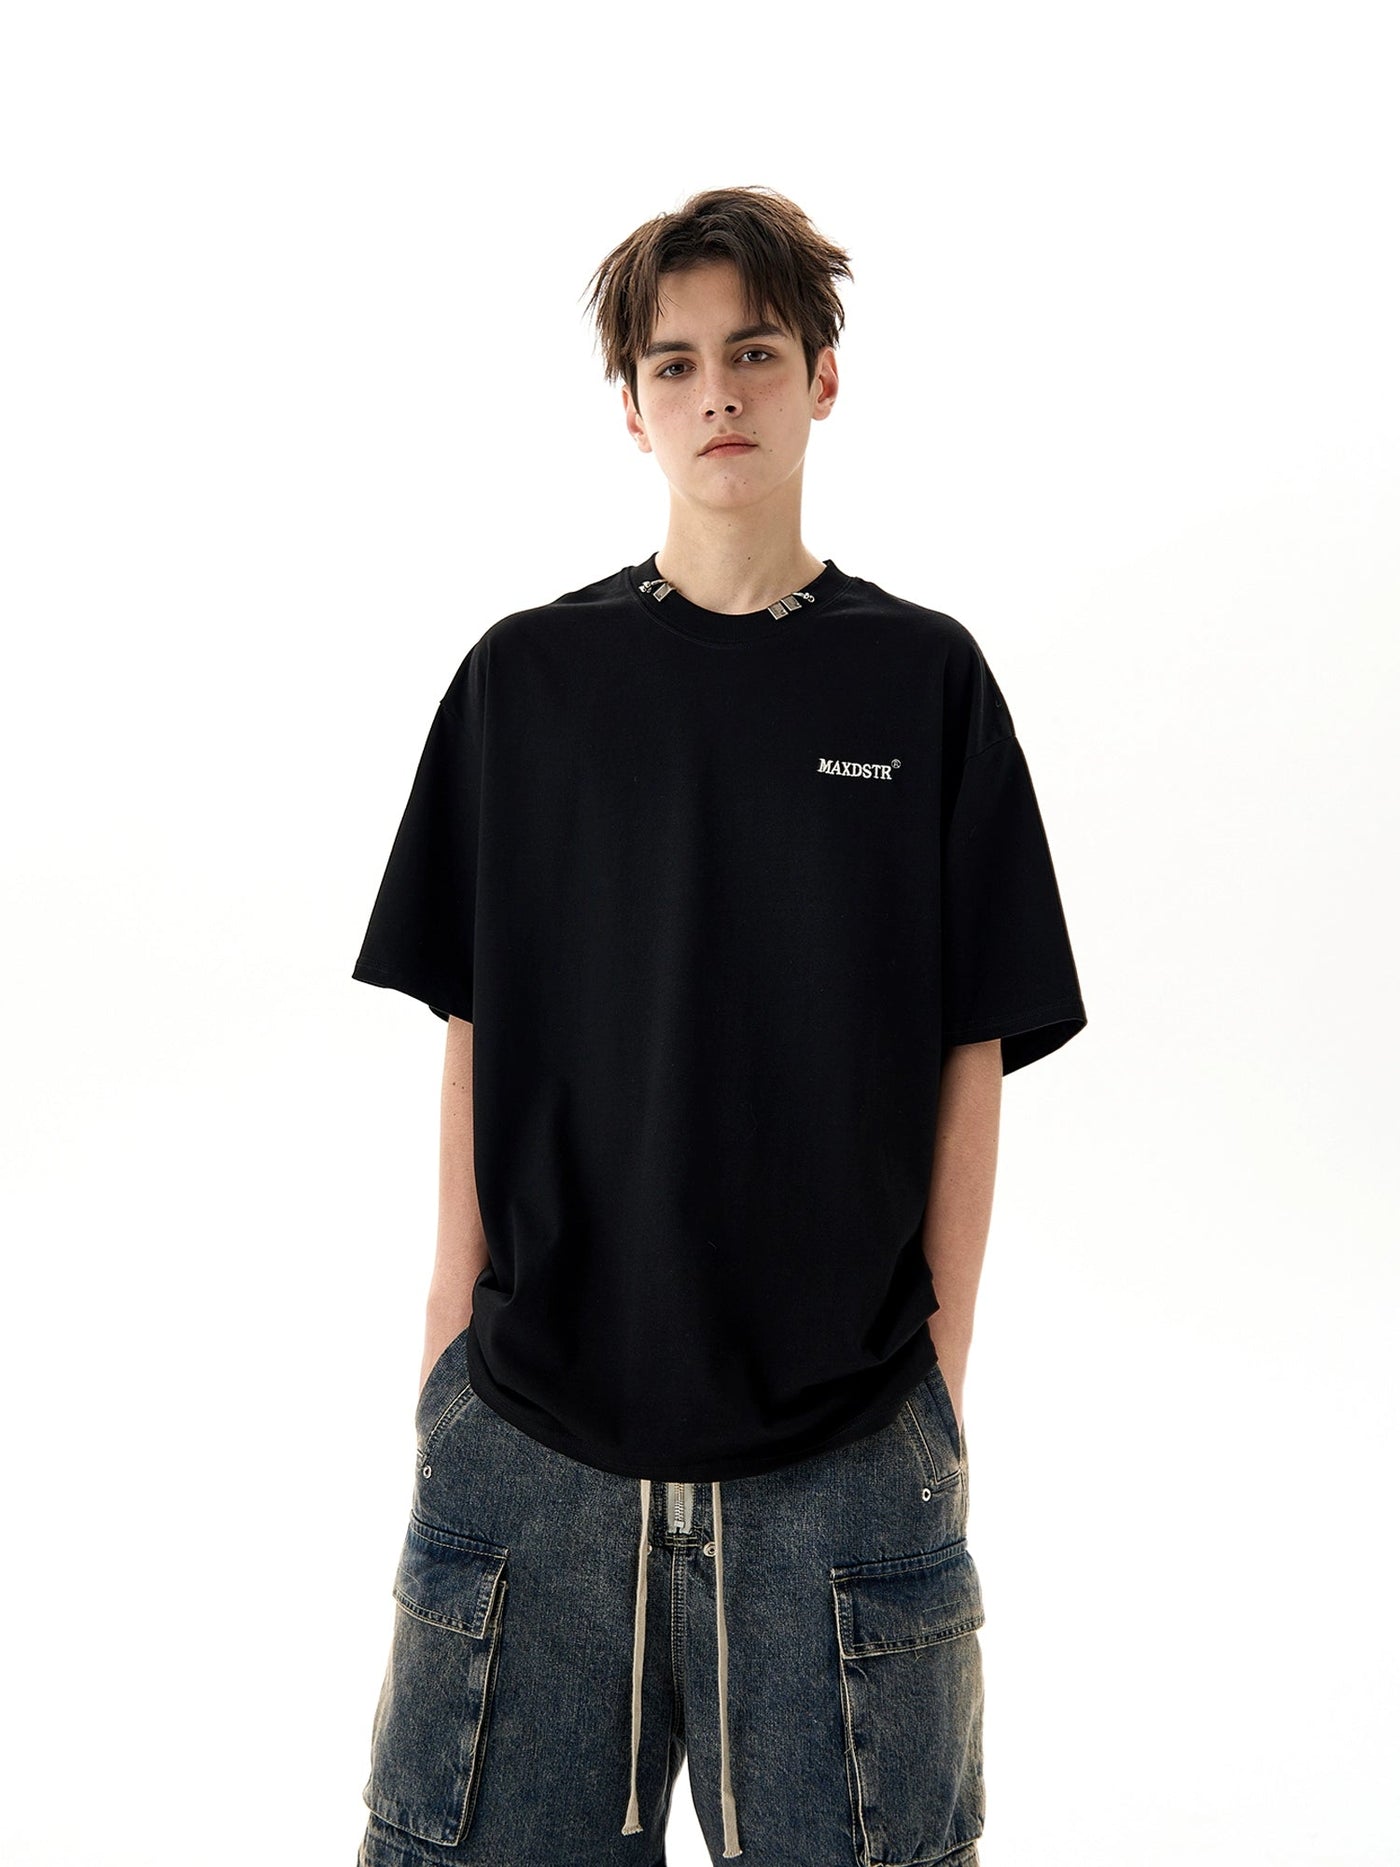 Solid Metal Buckle T-Shirt Korean Street Fashion T-Shirt By MaxDstr Shop Online at OH Vault